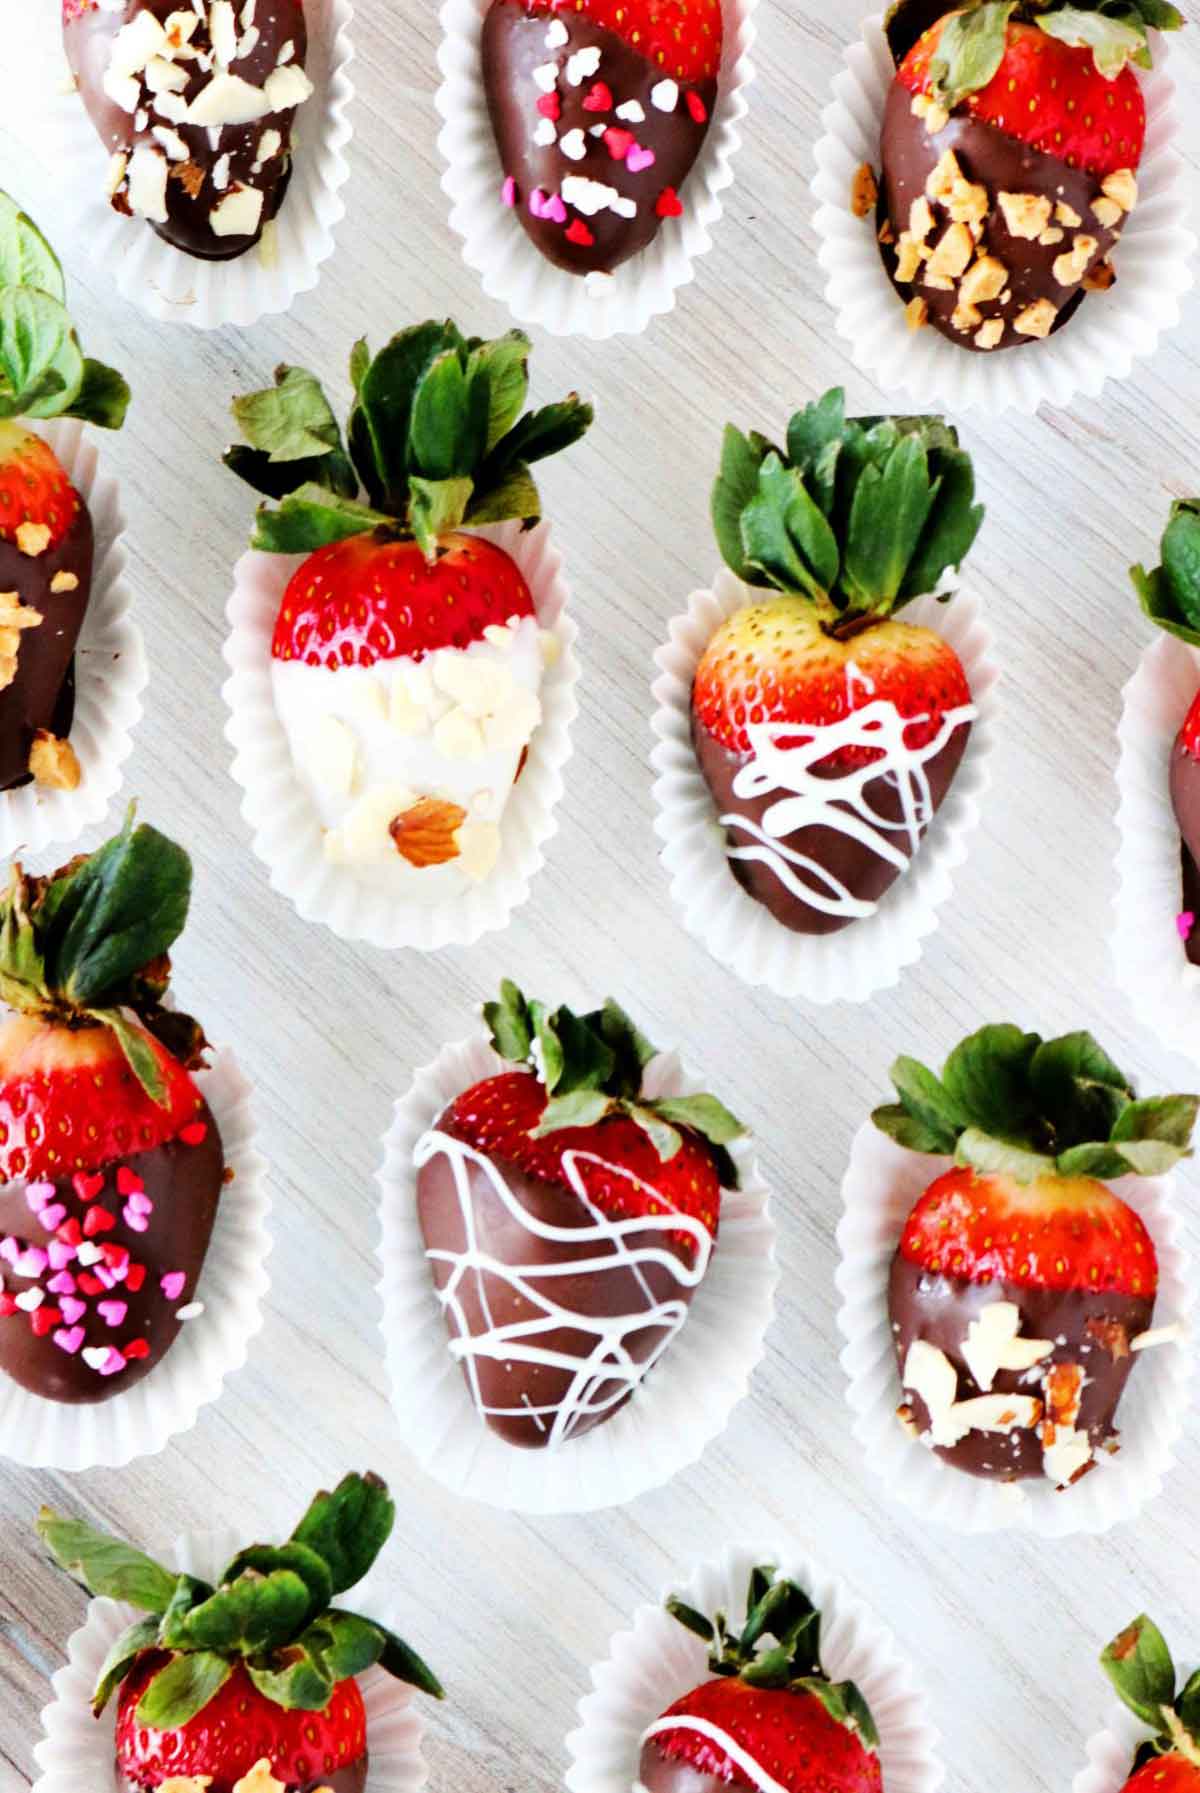 11 ornately decorated chocolate-covered strawberries.